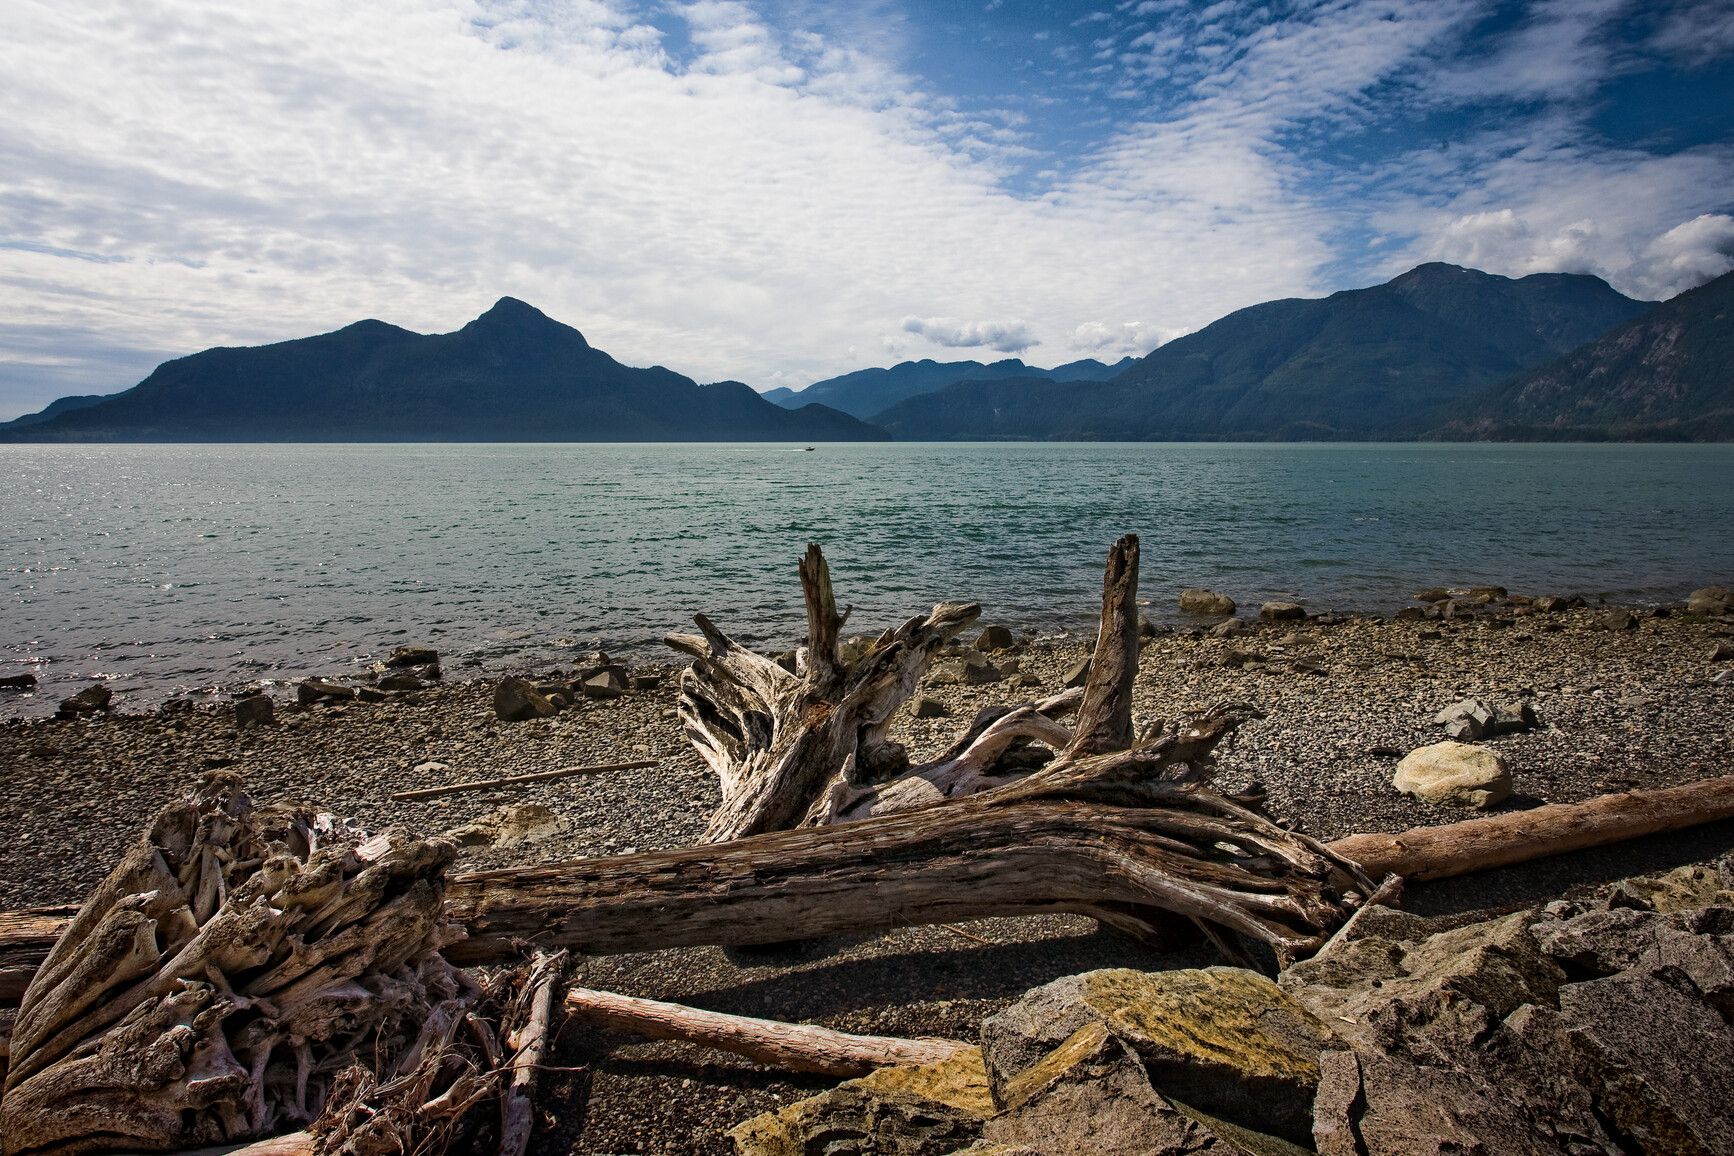 Logs on the beach at Porteau Cove Park, provide great seating for viewing Howe Sound and the mountains on the other side.